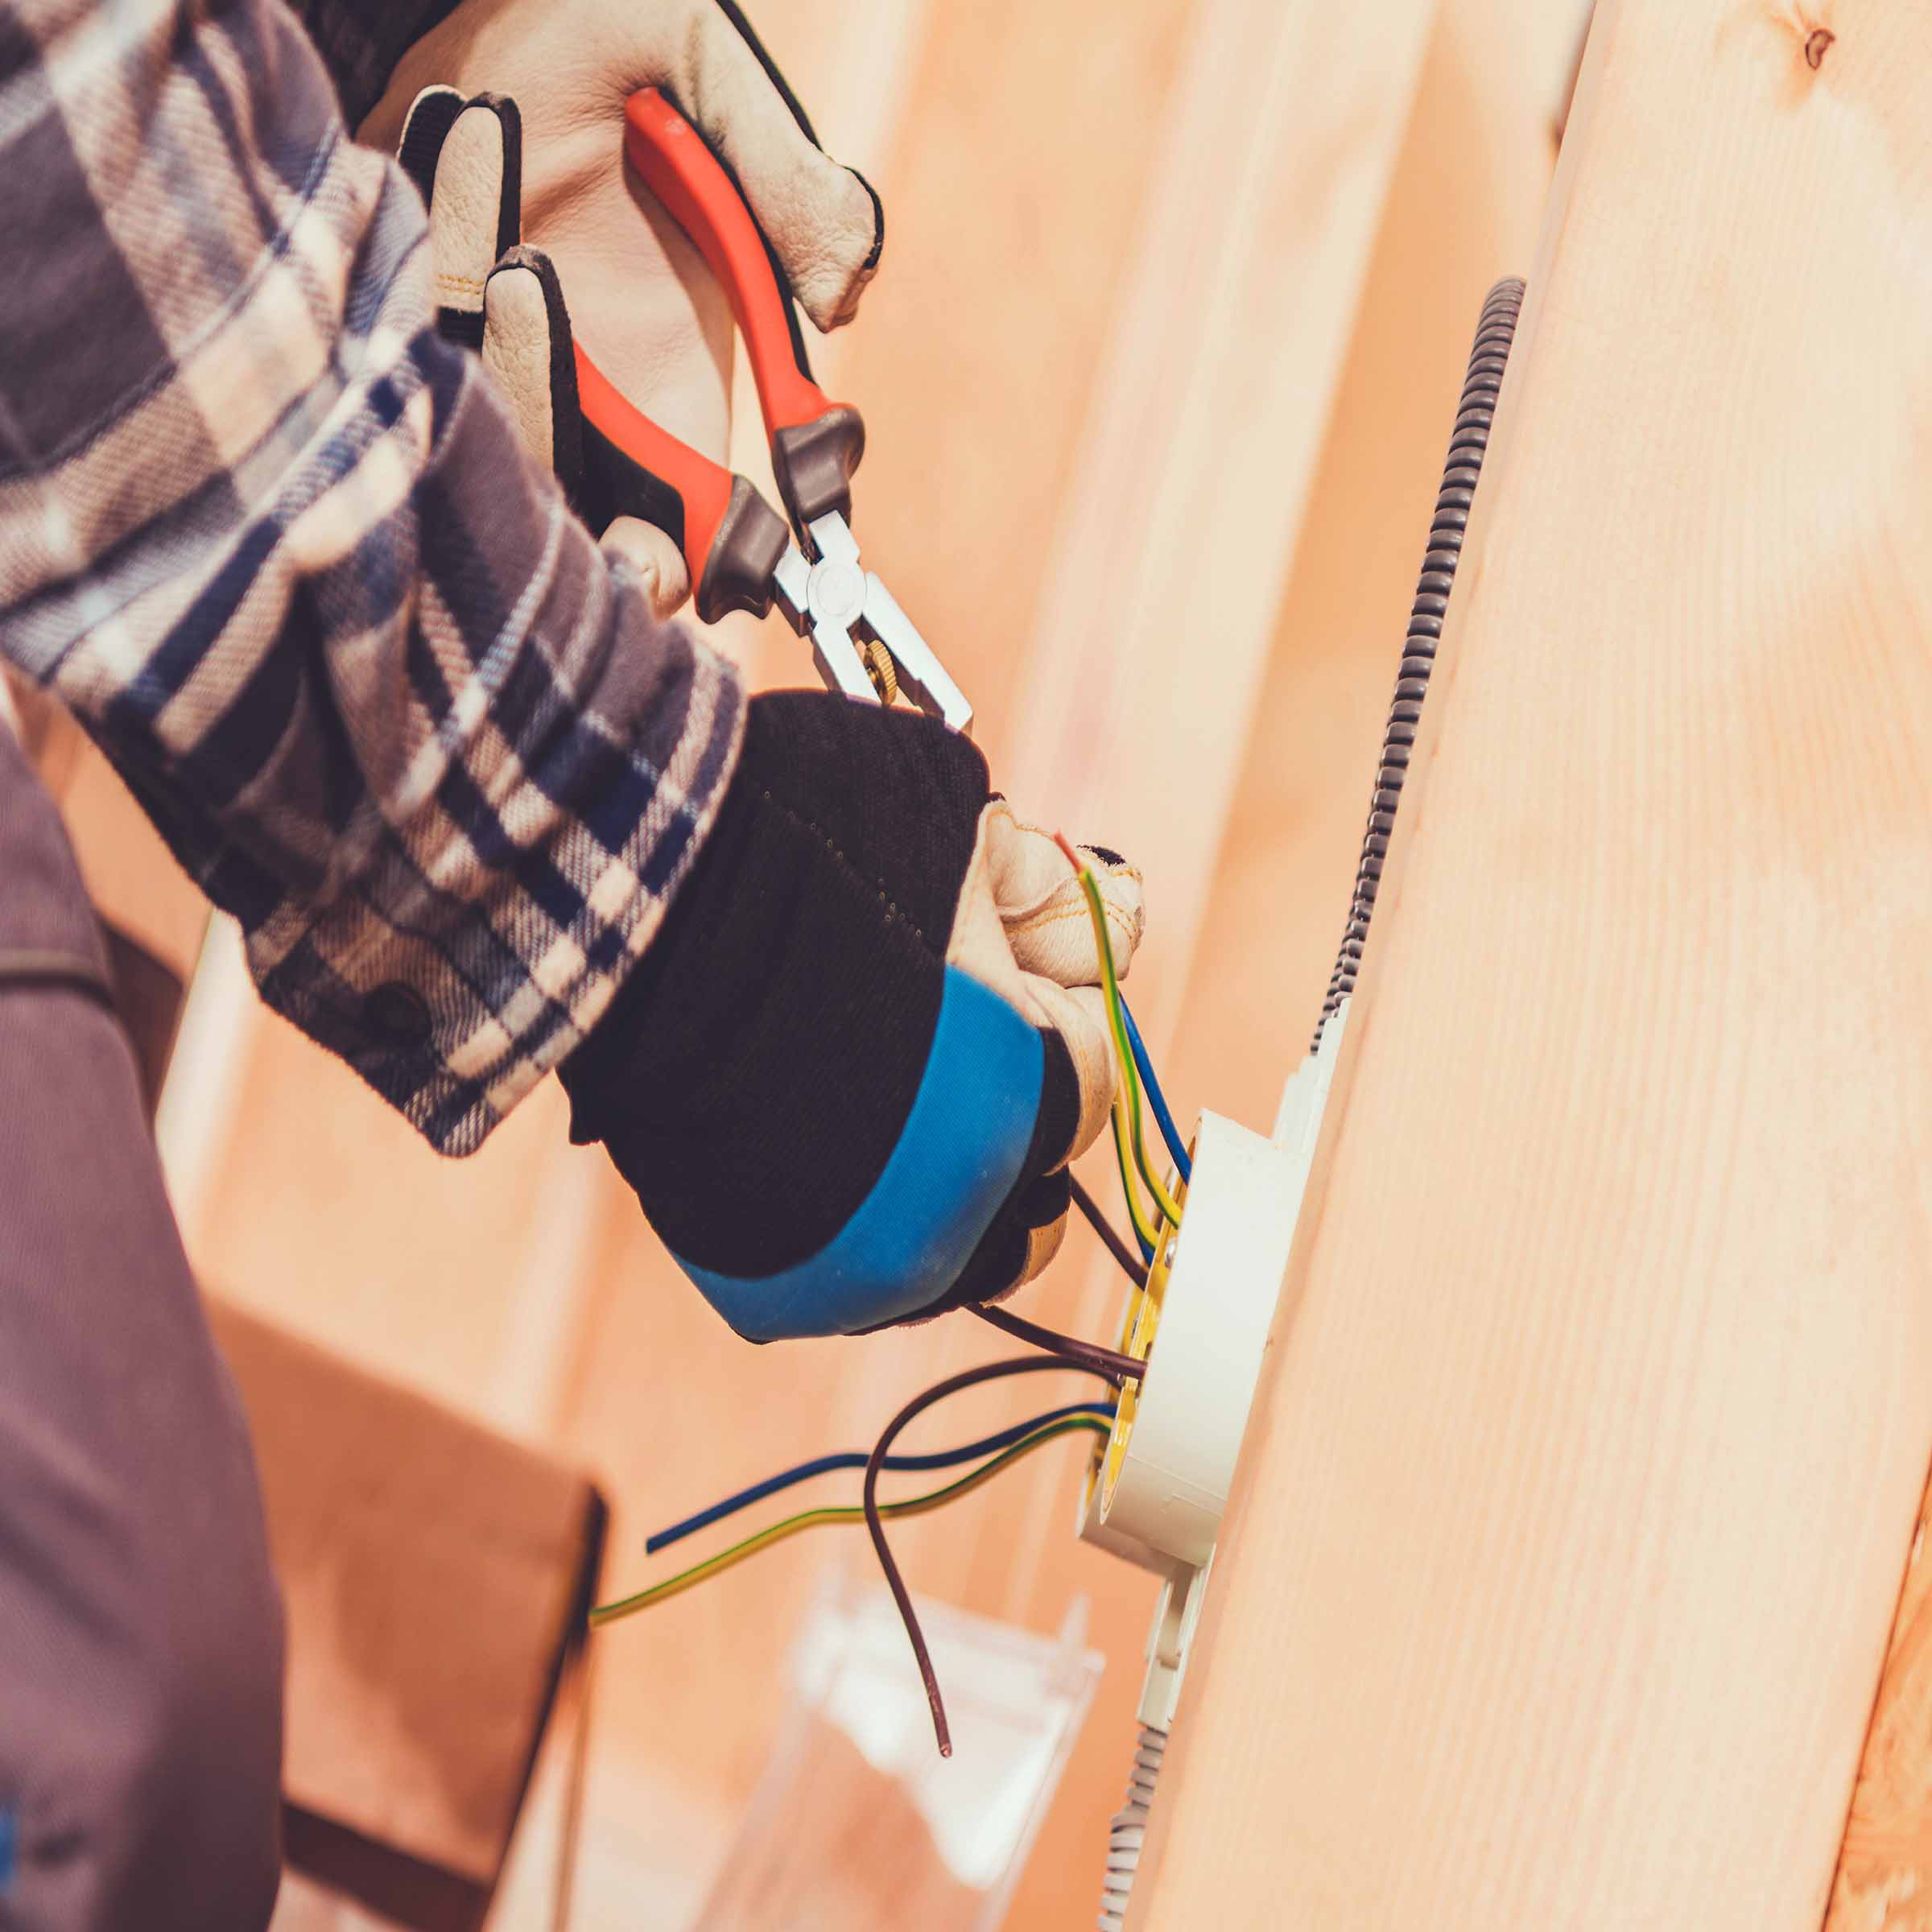 How Much Does An Electrician Earn In The Uk